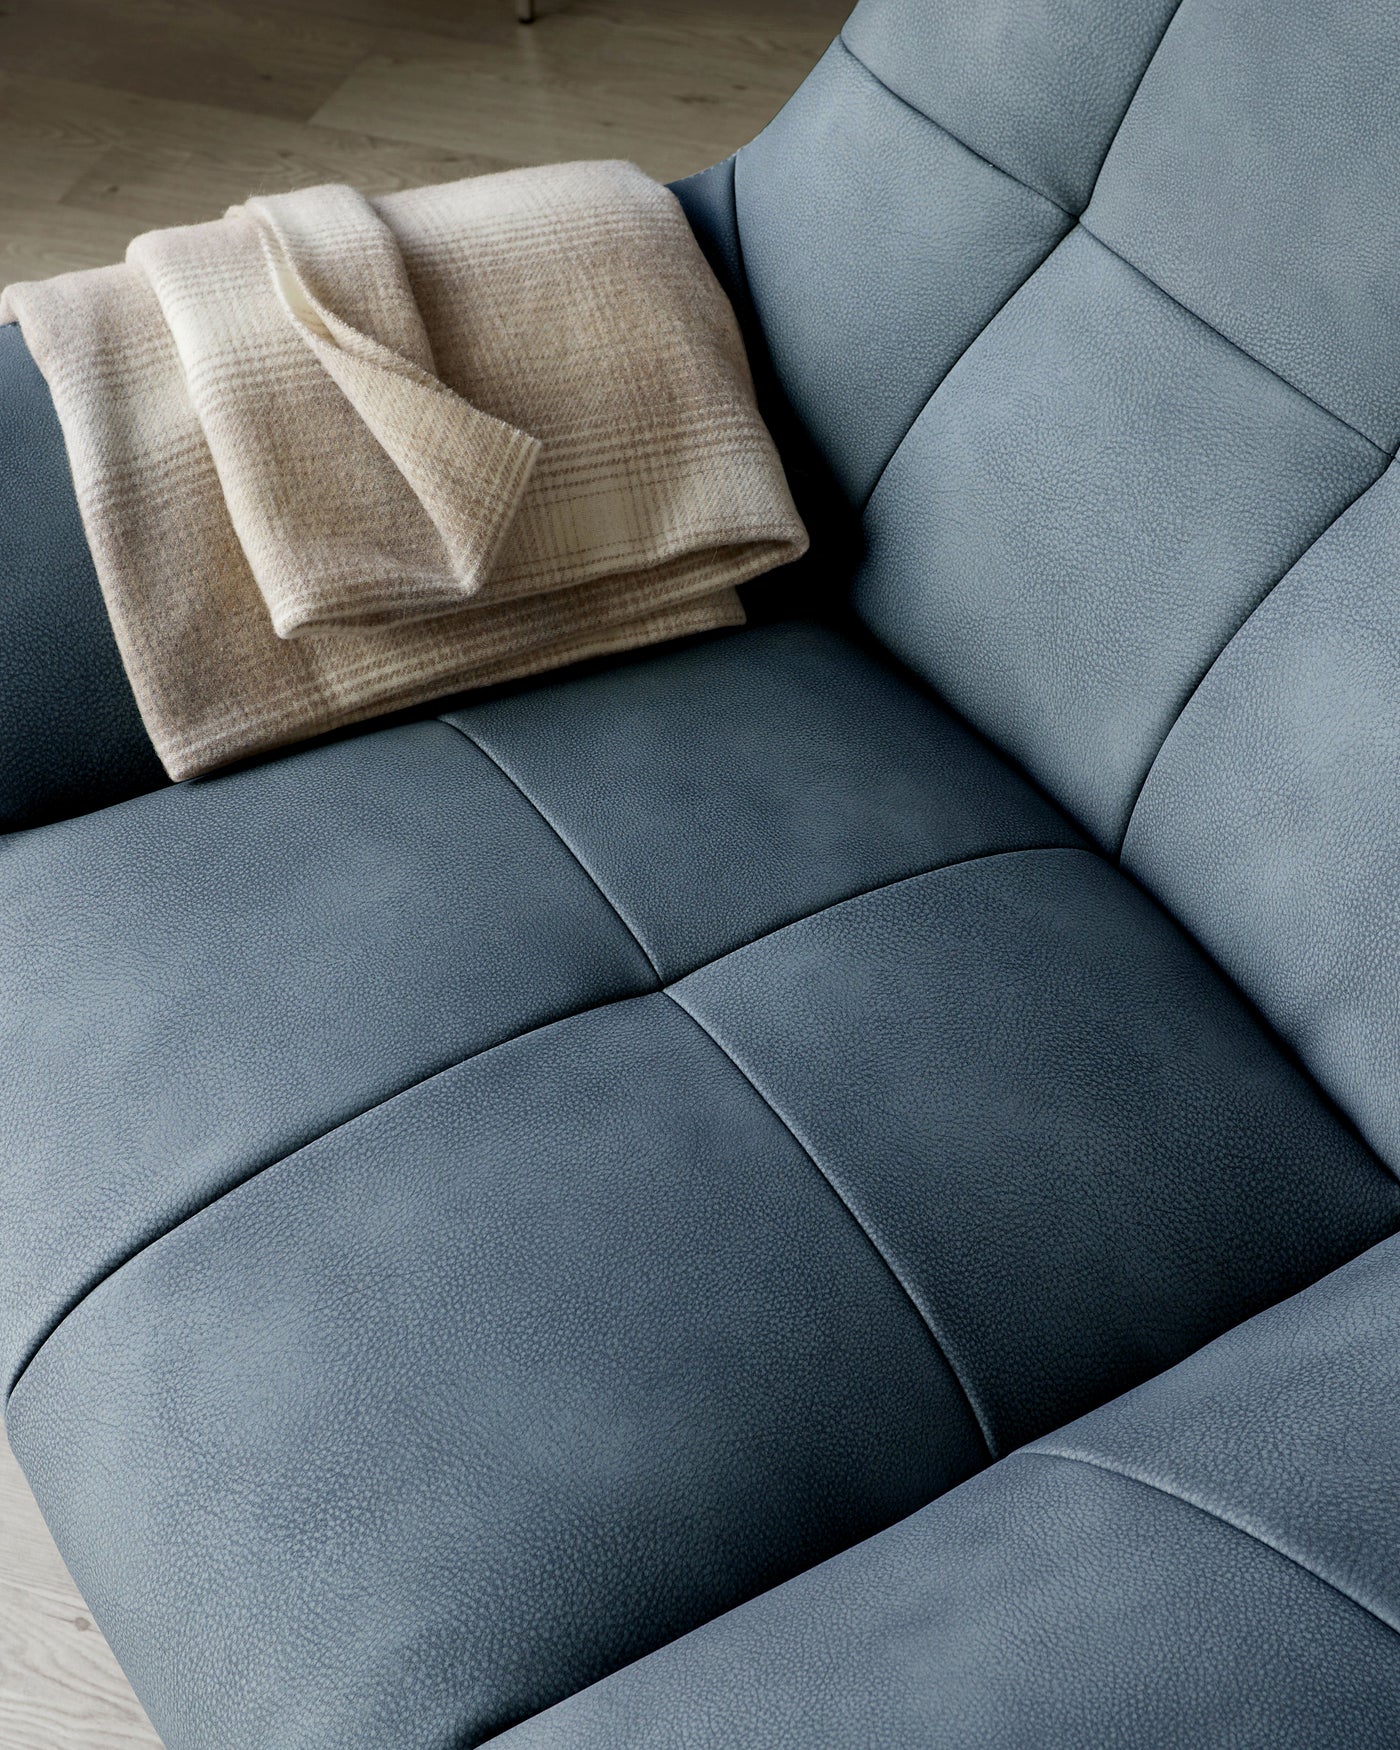 Luxurious modern blue leather sofa with a plush woven beige throw blanket neatly folded on one of its cushioned panels, featuring clean lines and a comfortable, inviting design.